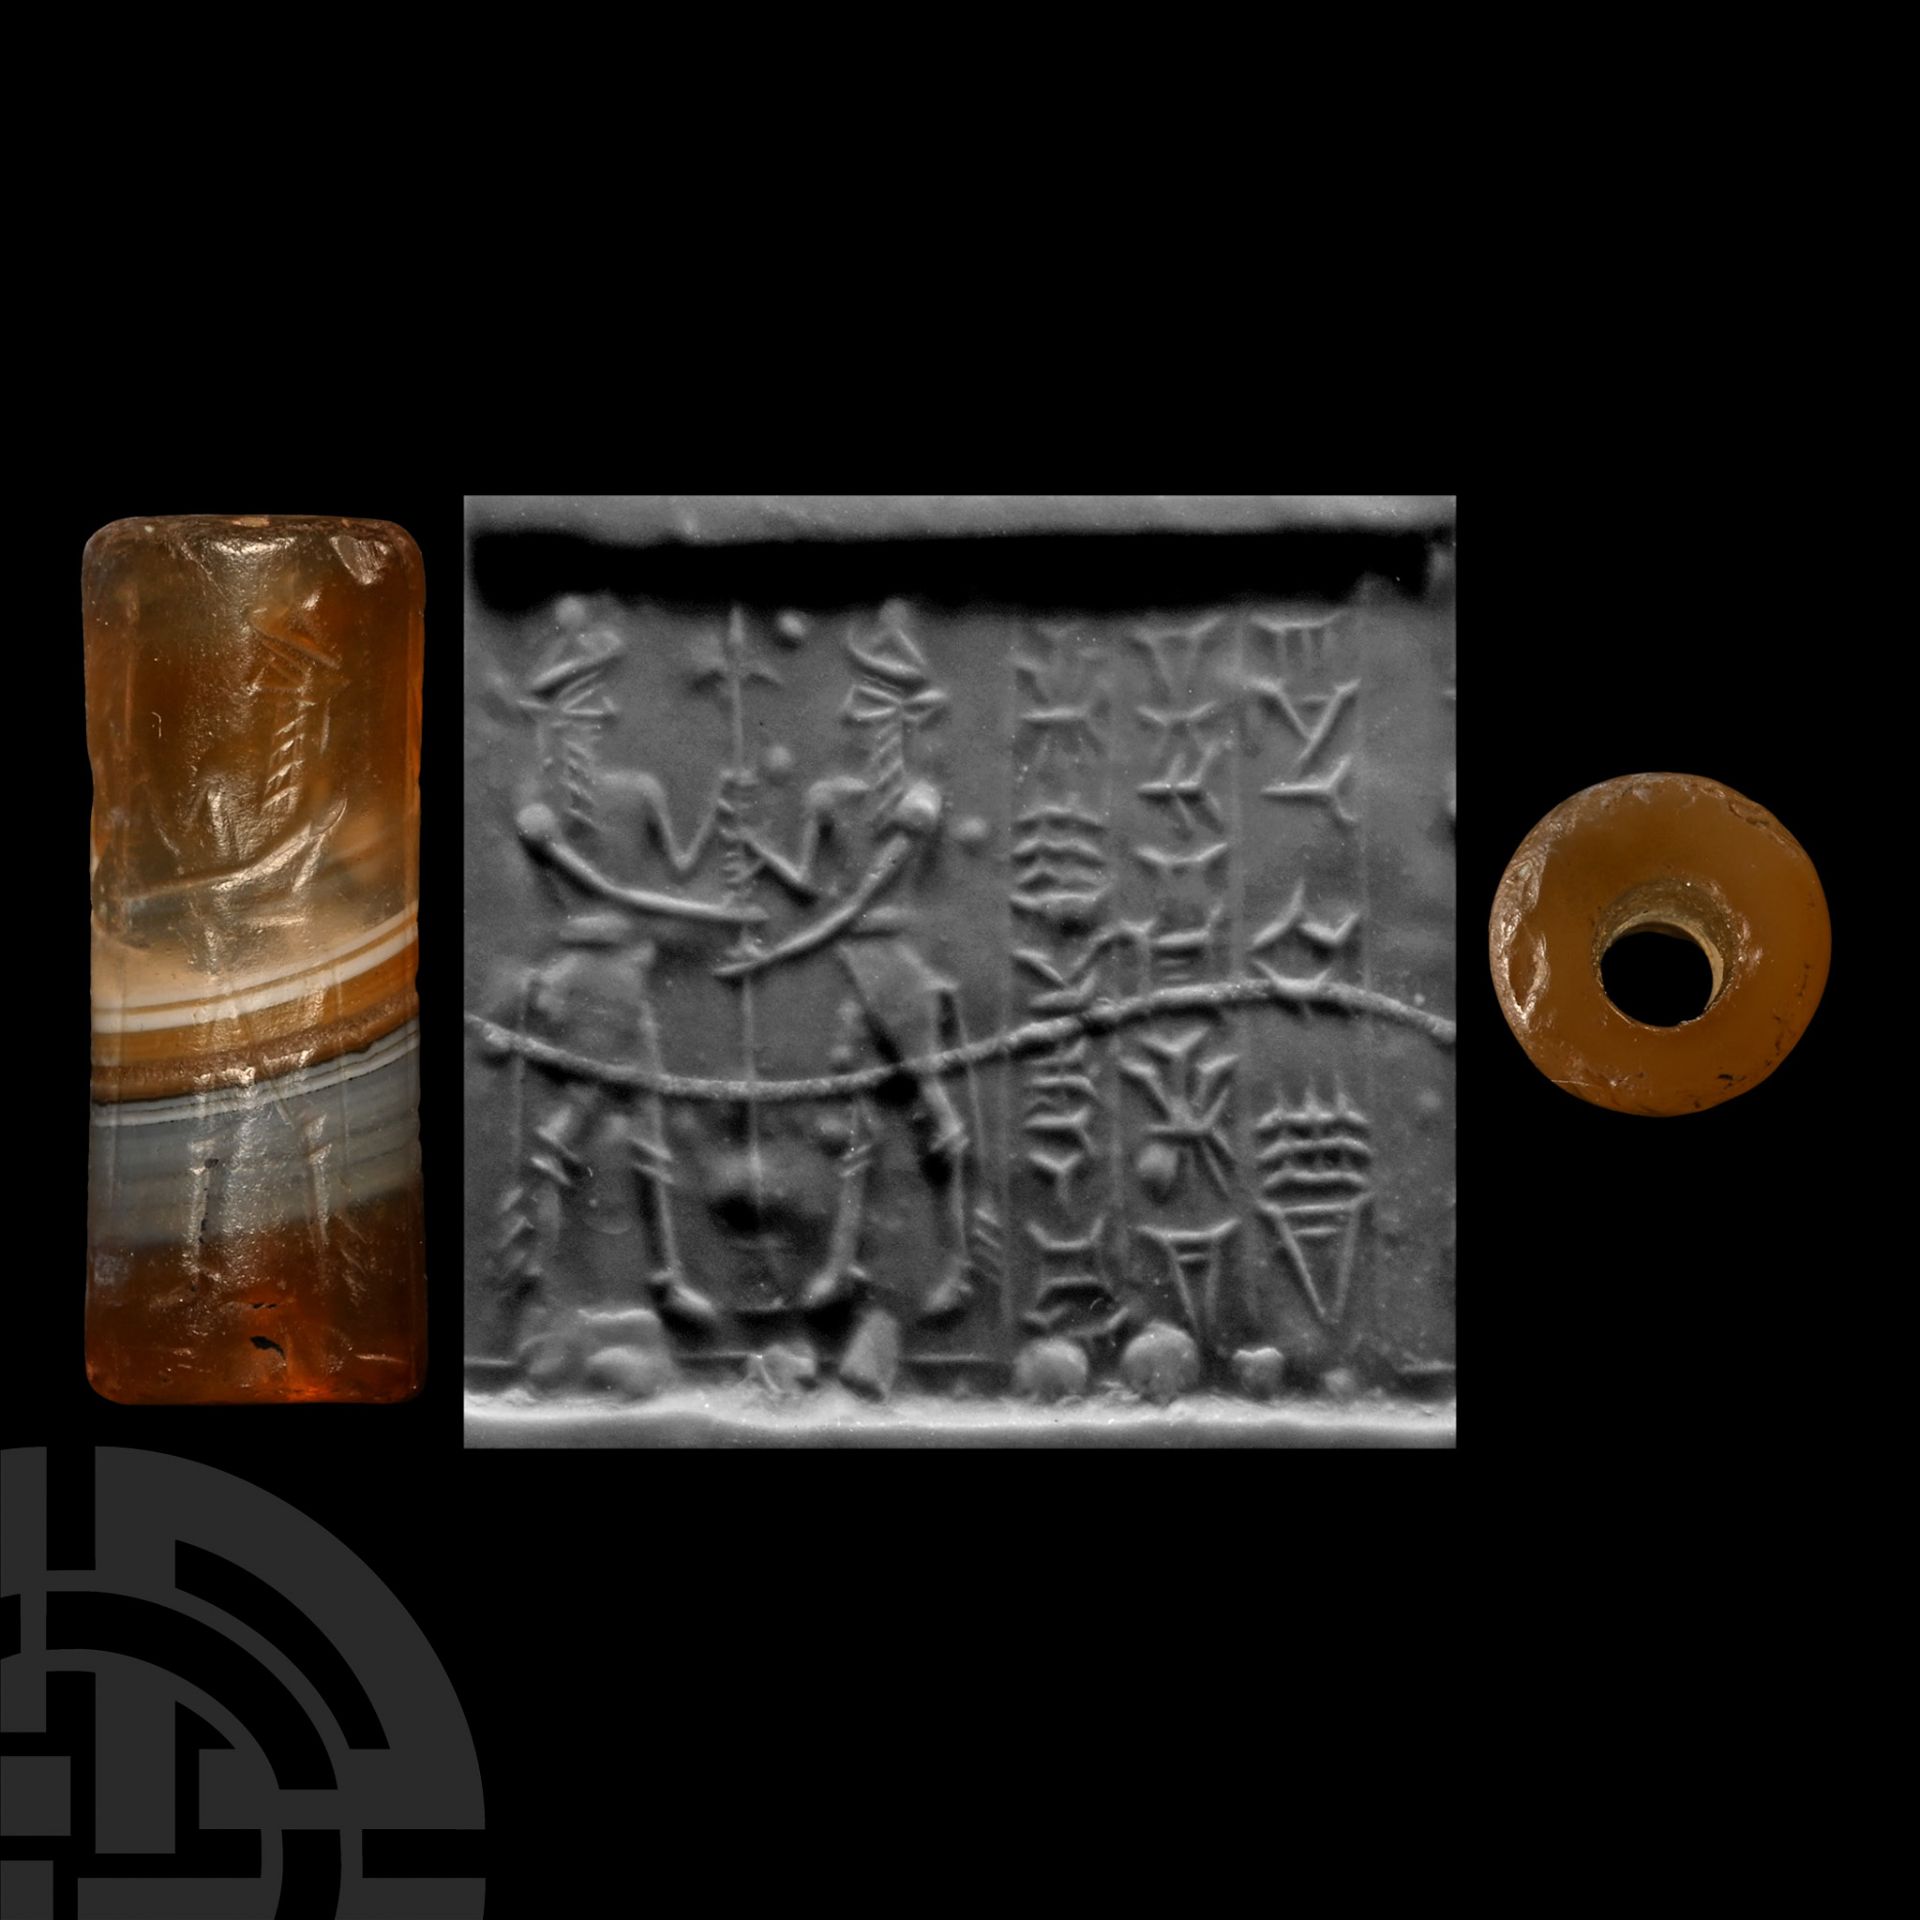 Babylonian Cylinder Seal with King and Bull-Men